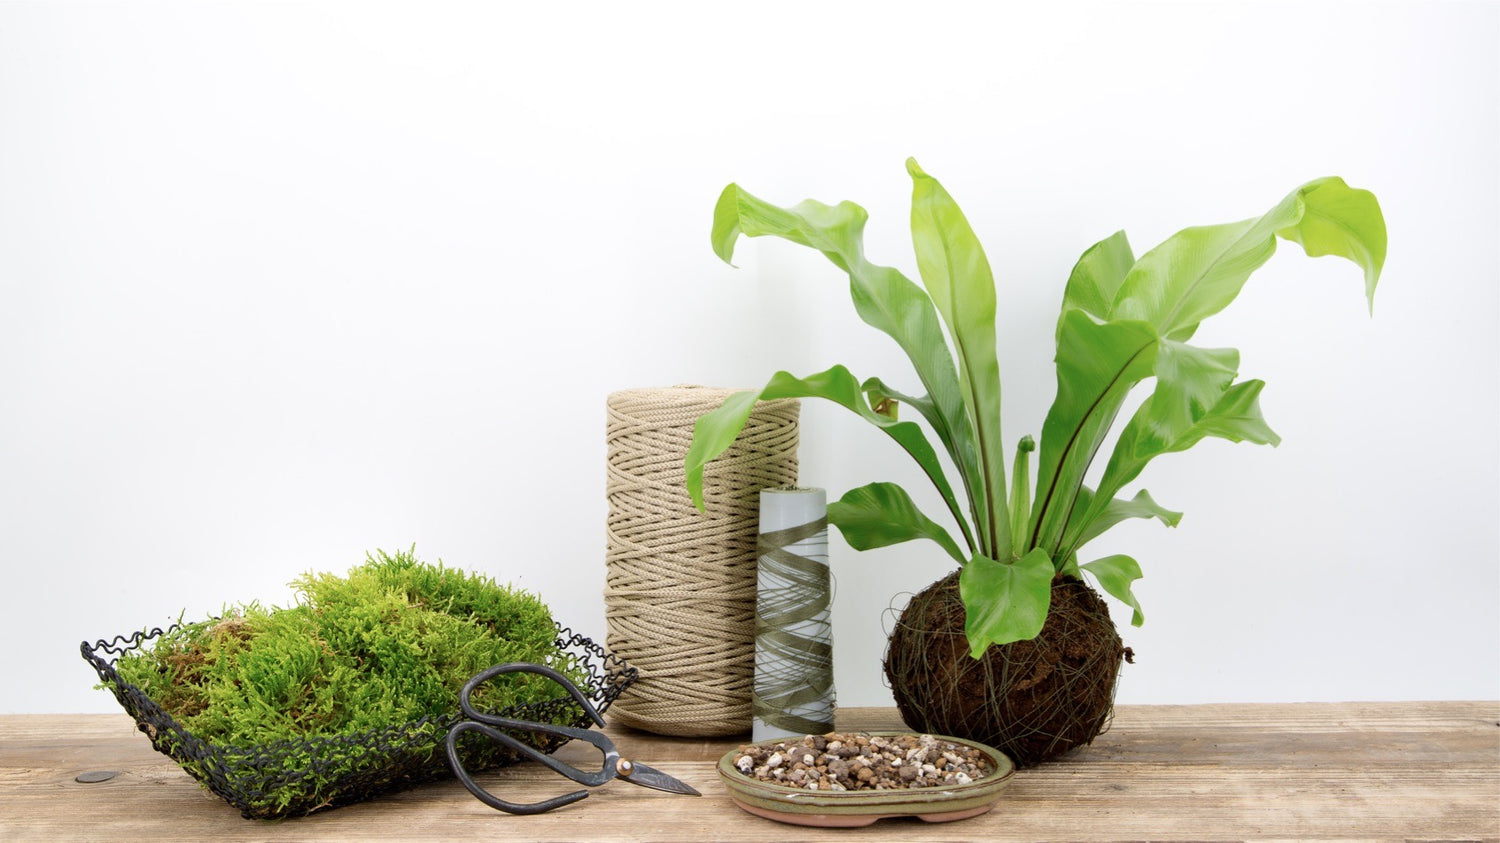 Kokedama birds nest fern by tranquil plants. Kokedama workshops DIY creative for businesses and companies.